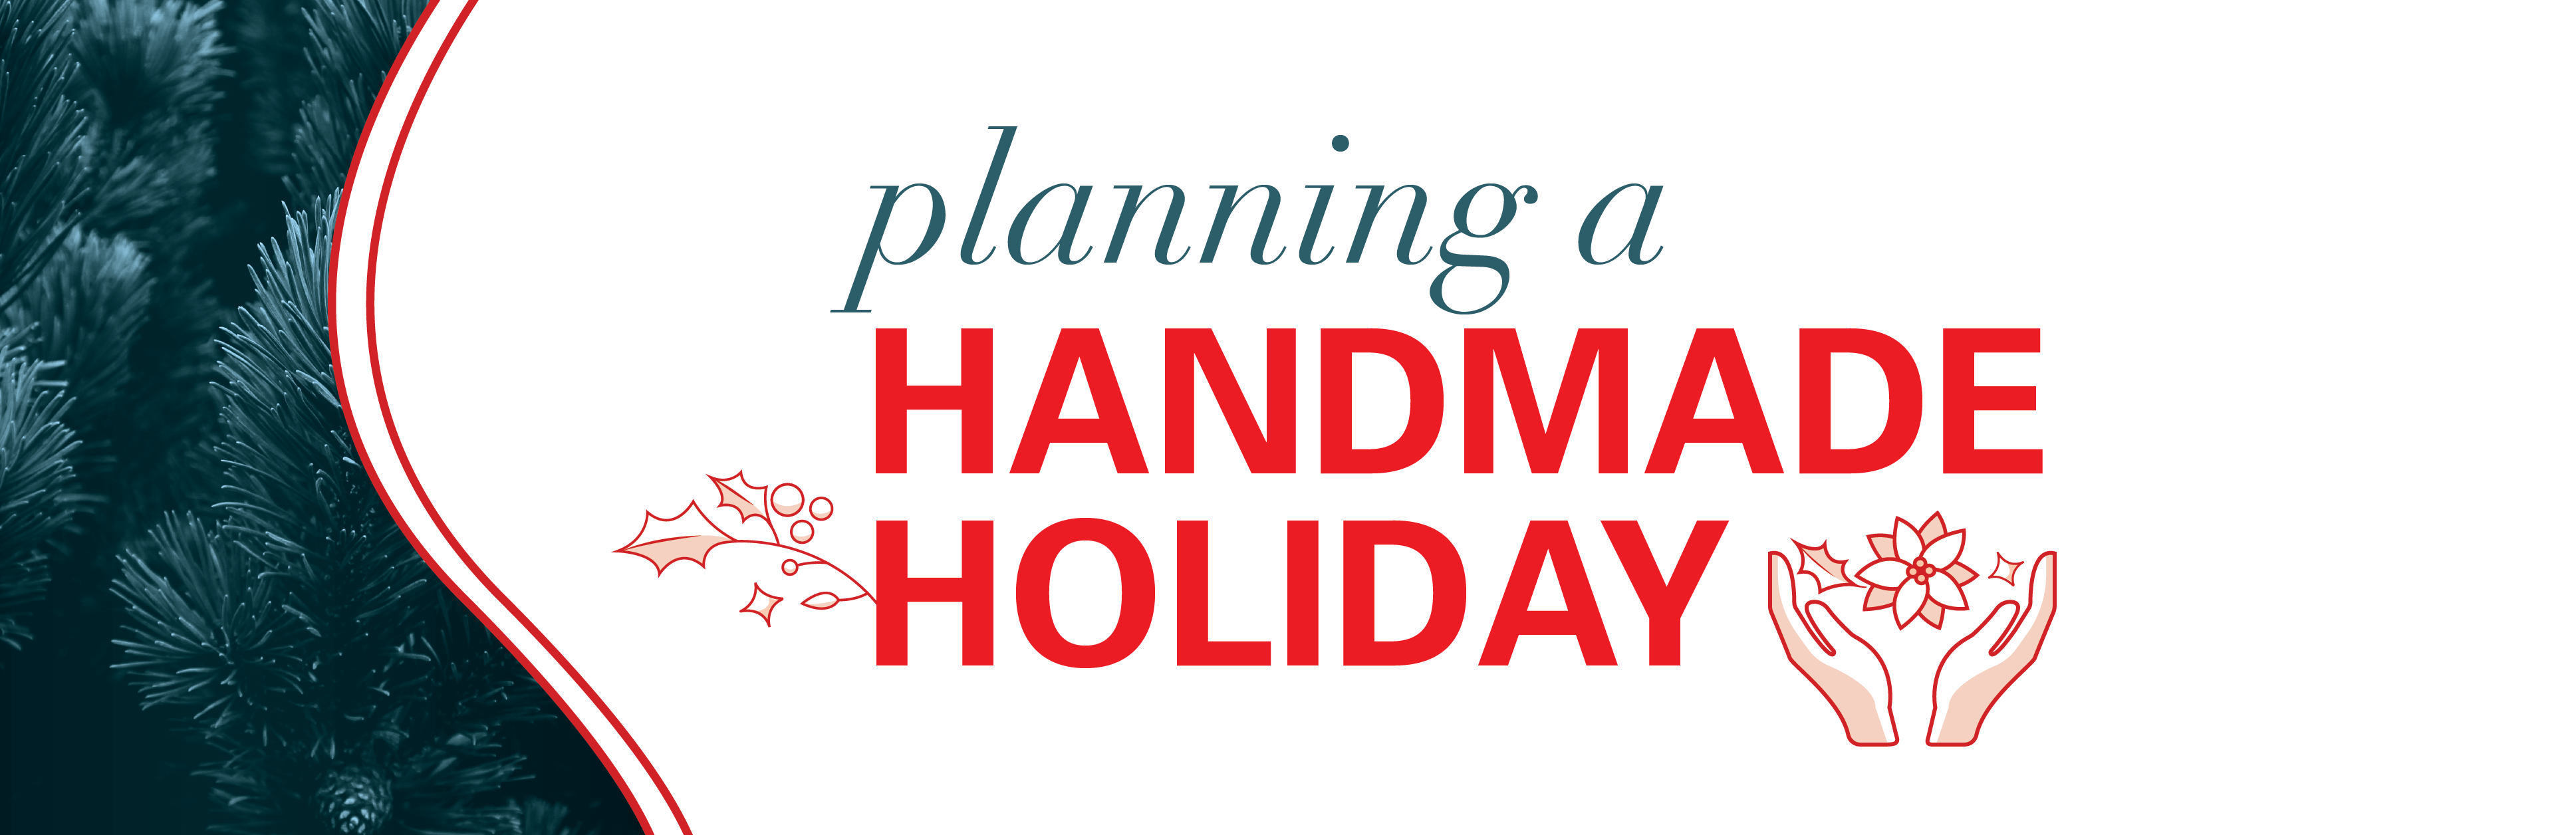 Planning a Handmade Holiday Cover